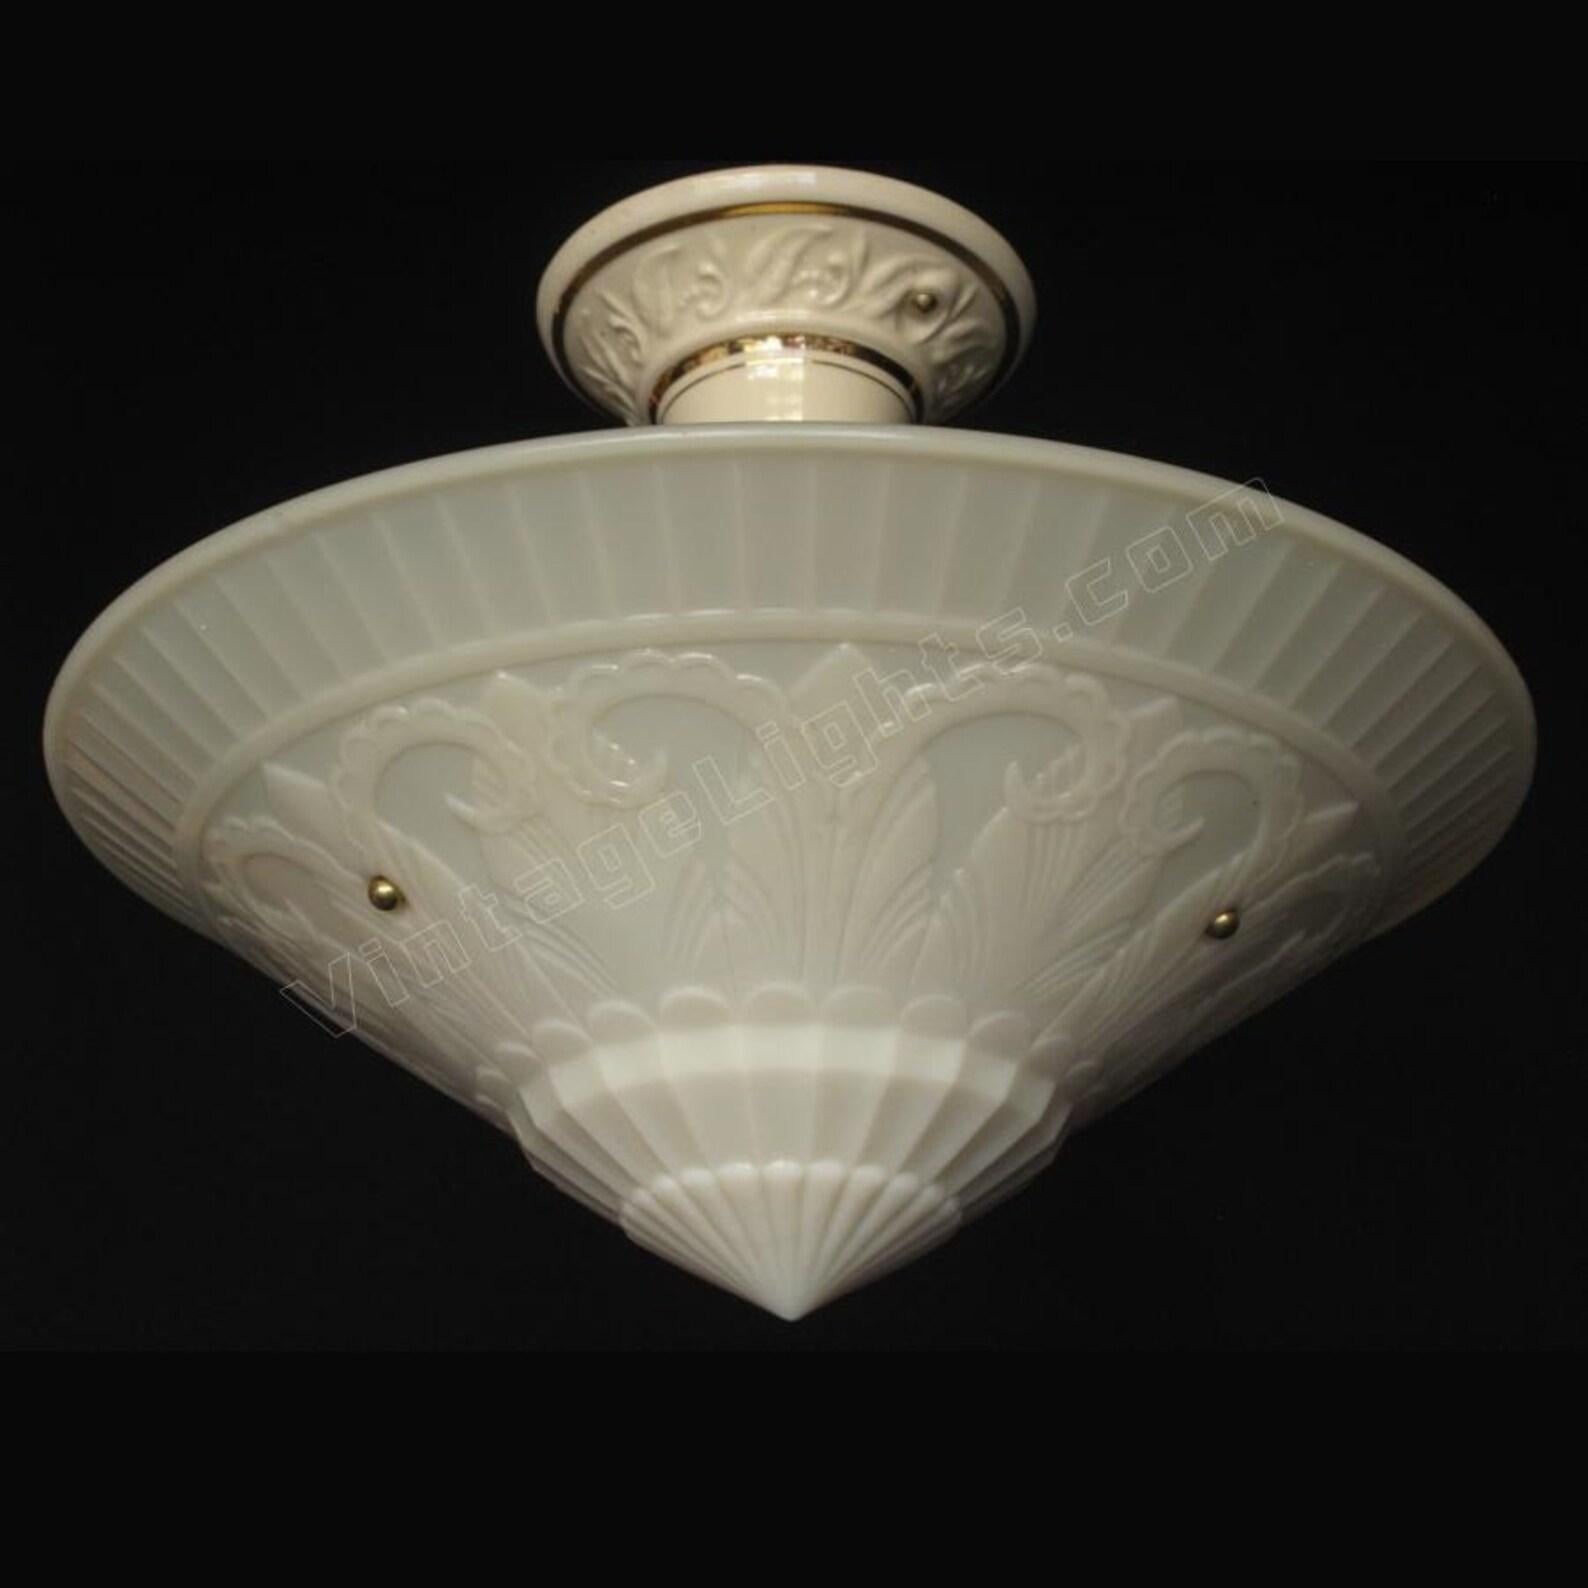 One of our favorite custard shades is this superbly detailed deco inspired floral pattern hanging shade. This antique lighting fixture is 15 1/2 inches wide, a compelling sight when lit. The custard glass has that 